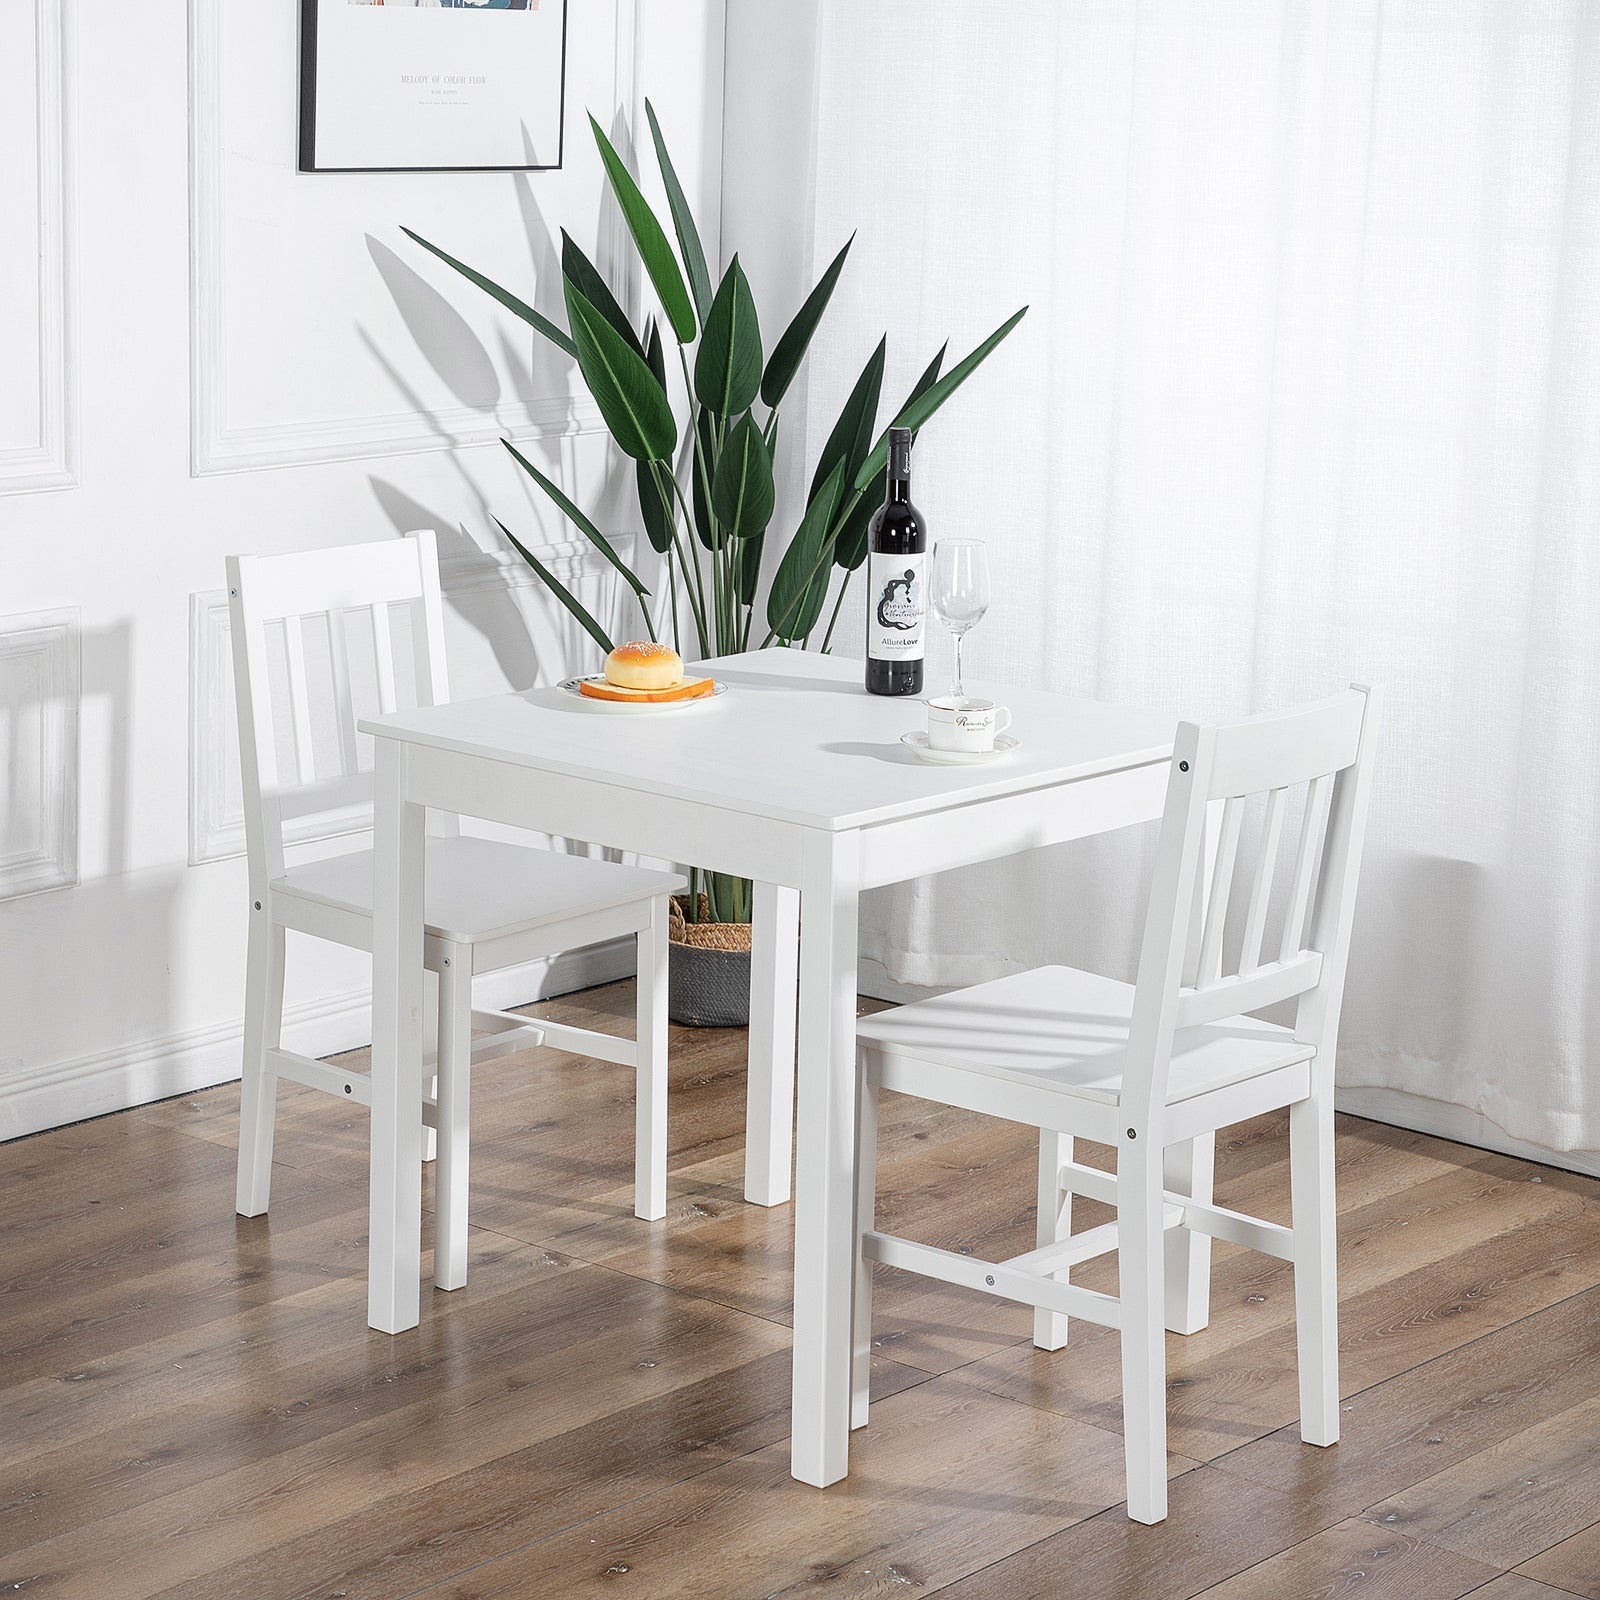 LILAC Dining Table with 2 Chairs Set 74*74*73cm - White/Grey/Brown